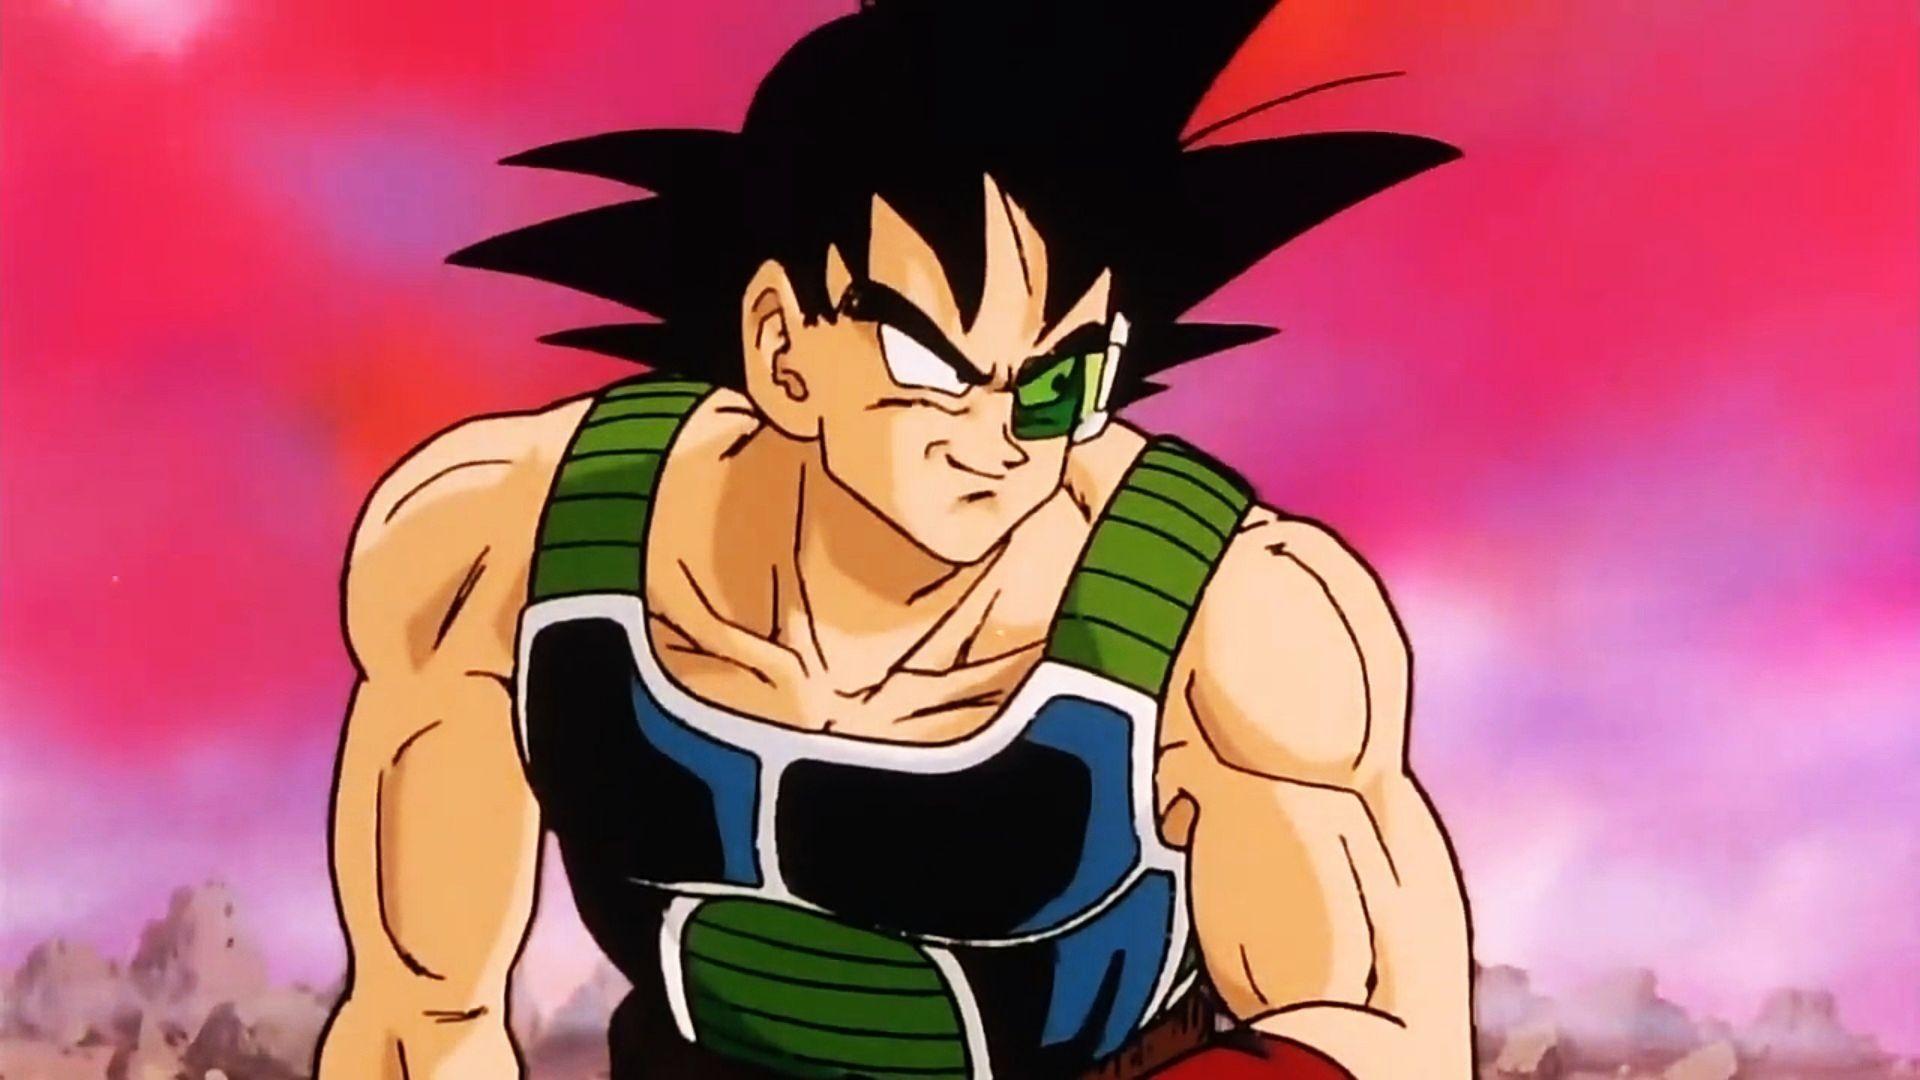 Read more information about the character bardock from dragon ball z? 